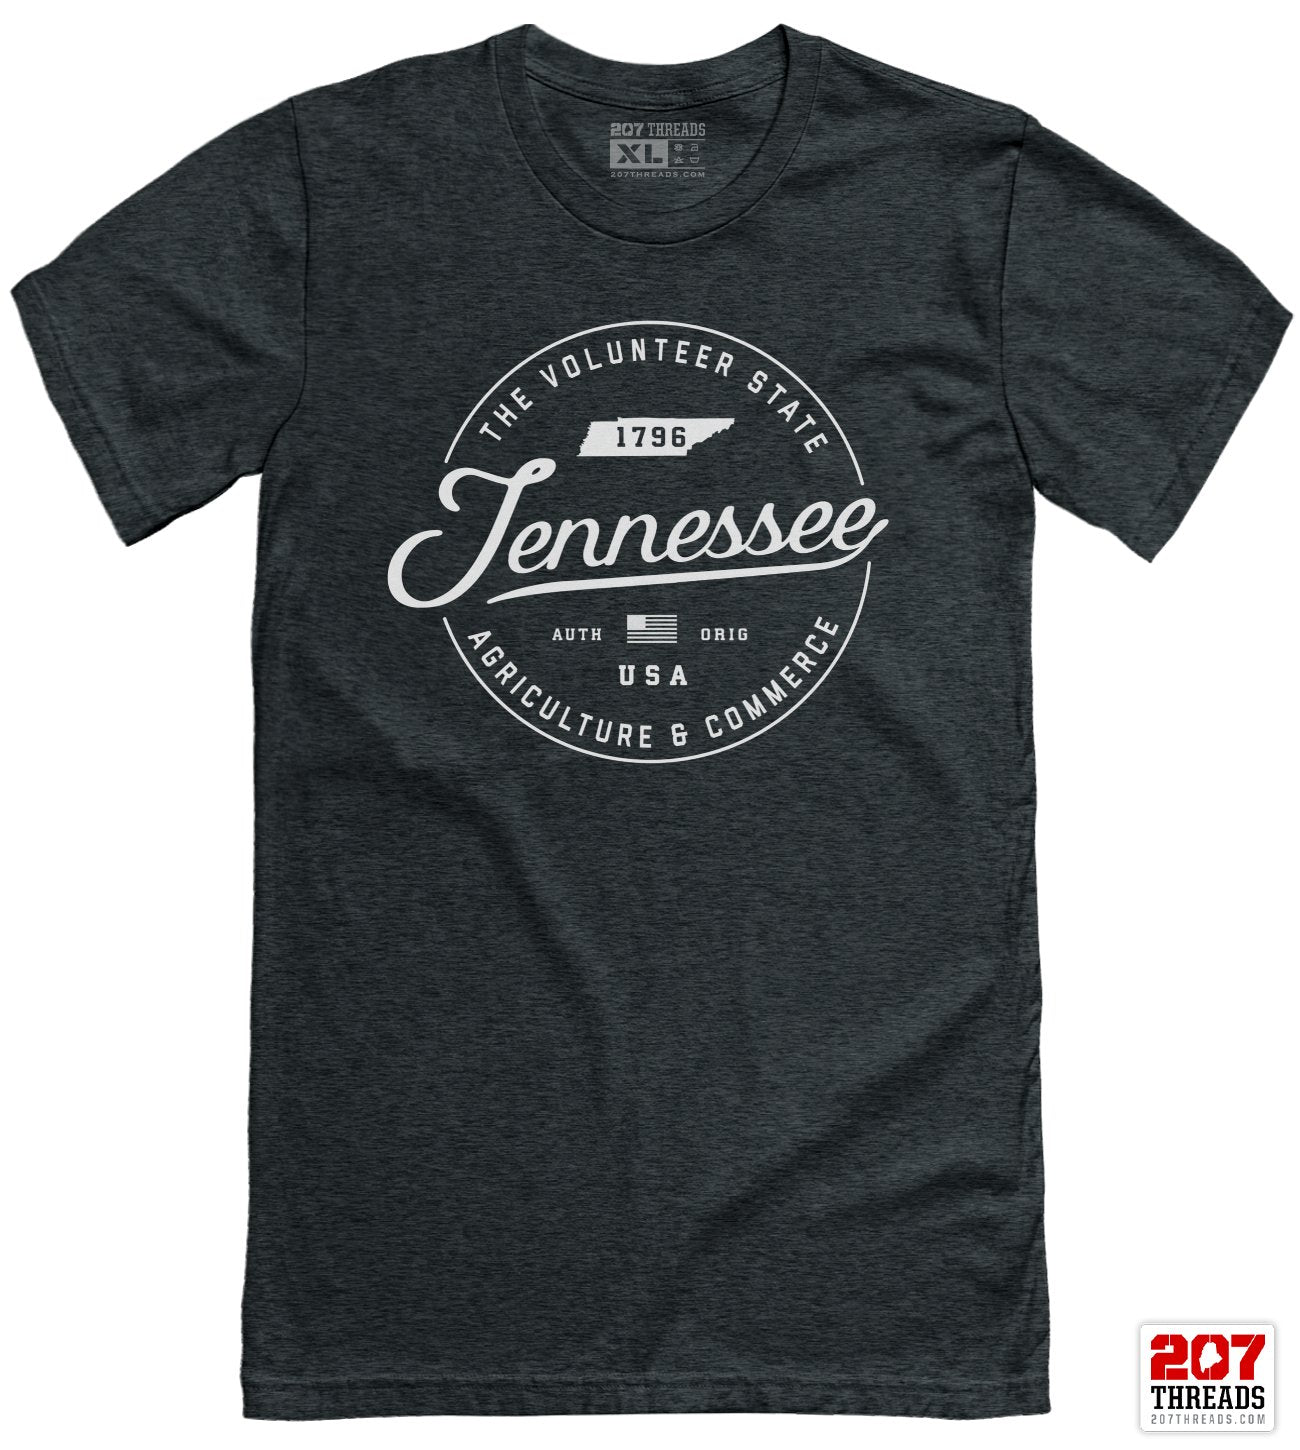 State of Tennessee T-Shirt - Soft Tennessee Vacation Tee